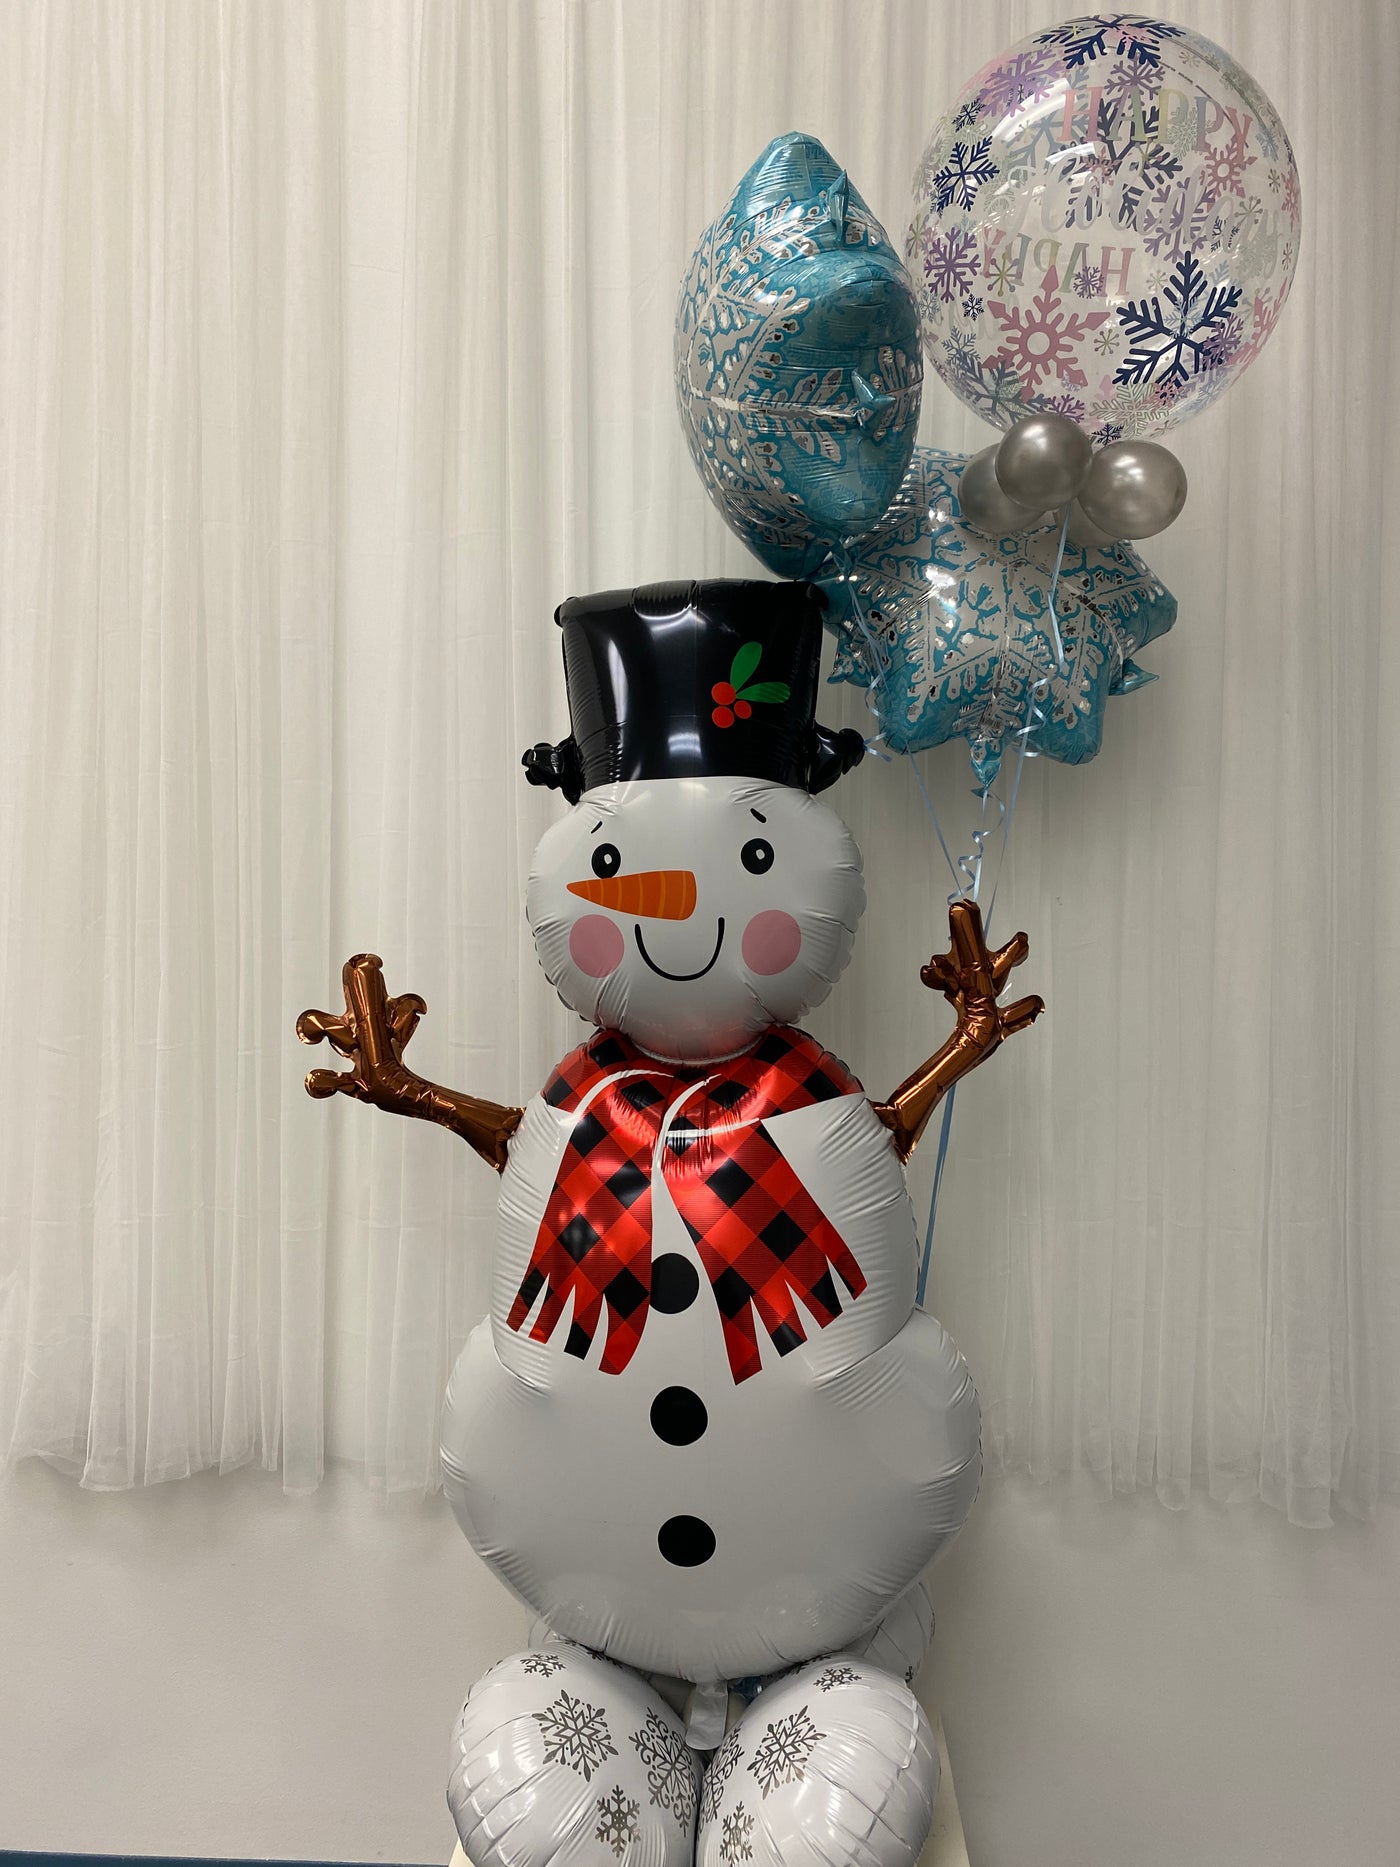 Happy Holidays Snowman Delivery Bouquet